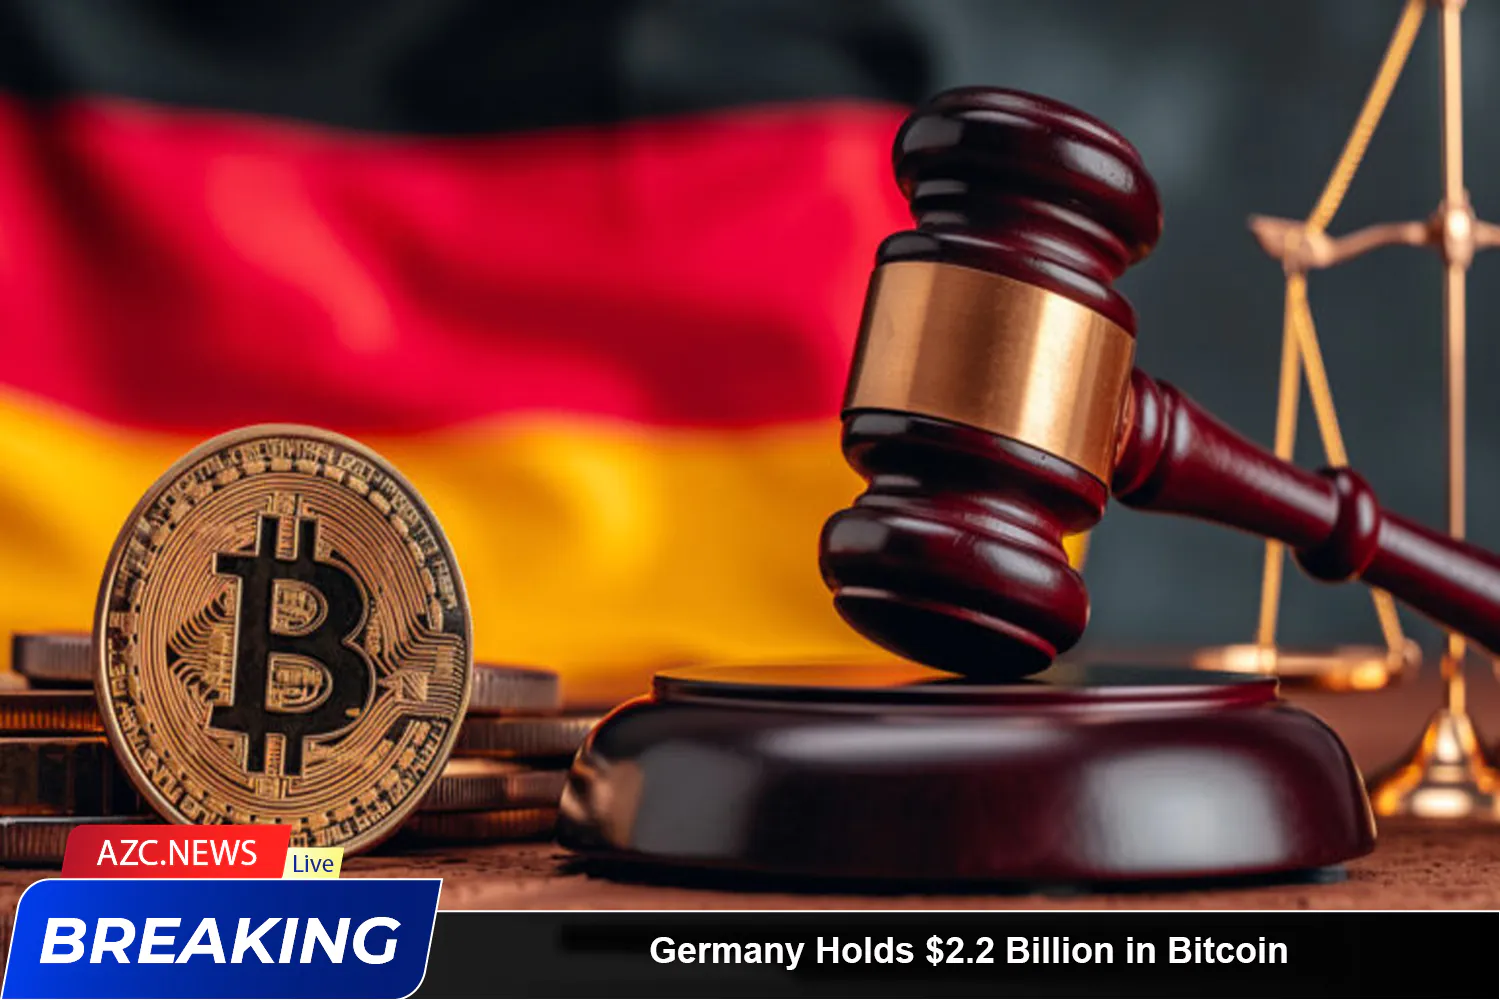 Germany Holds $2,2 Billion In Bitcoin, Representing 10% Of The Total Trading Volume